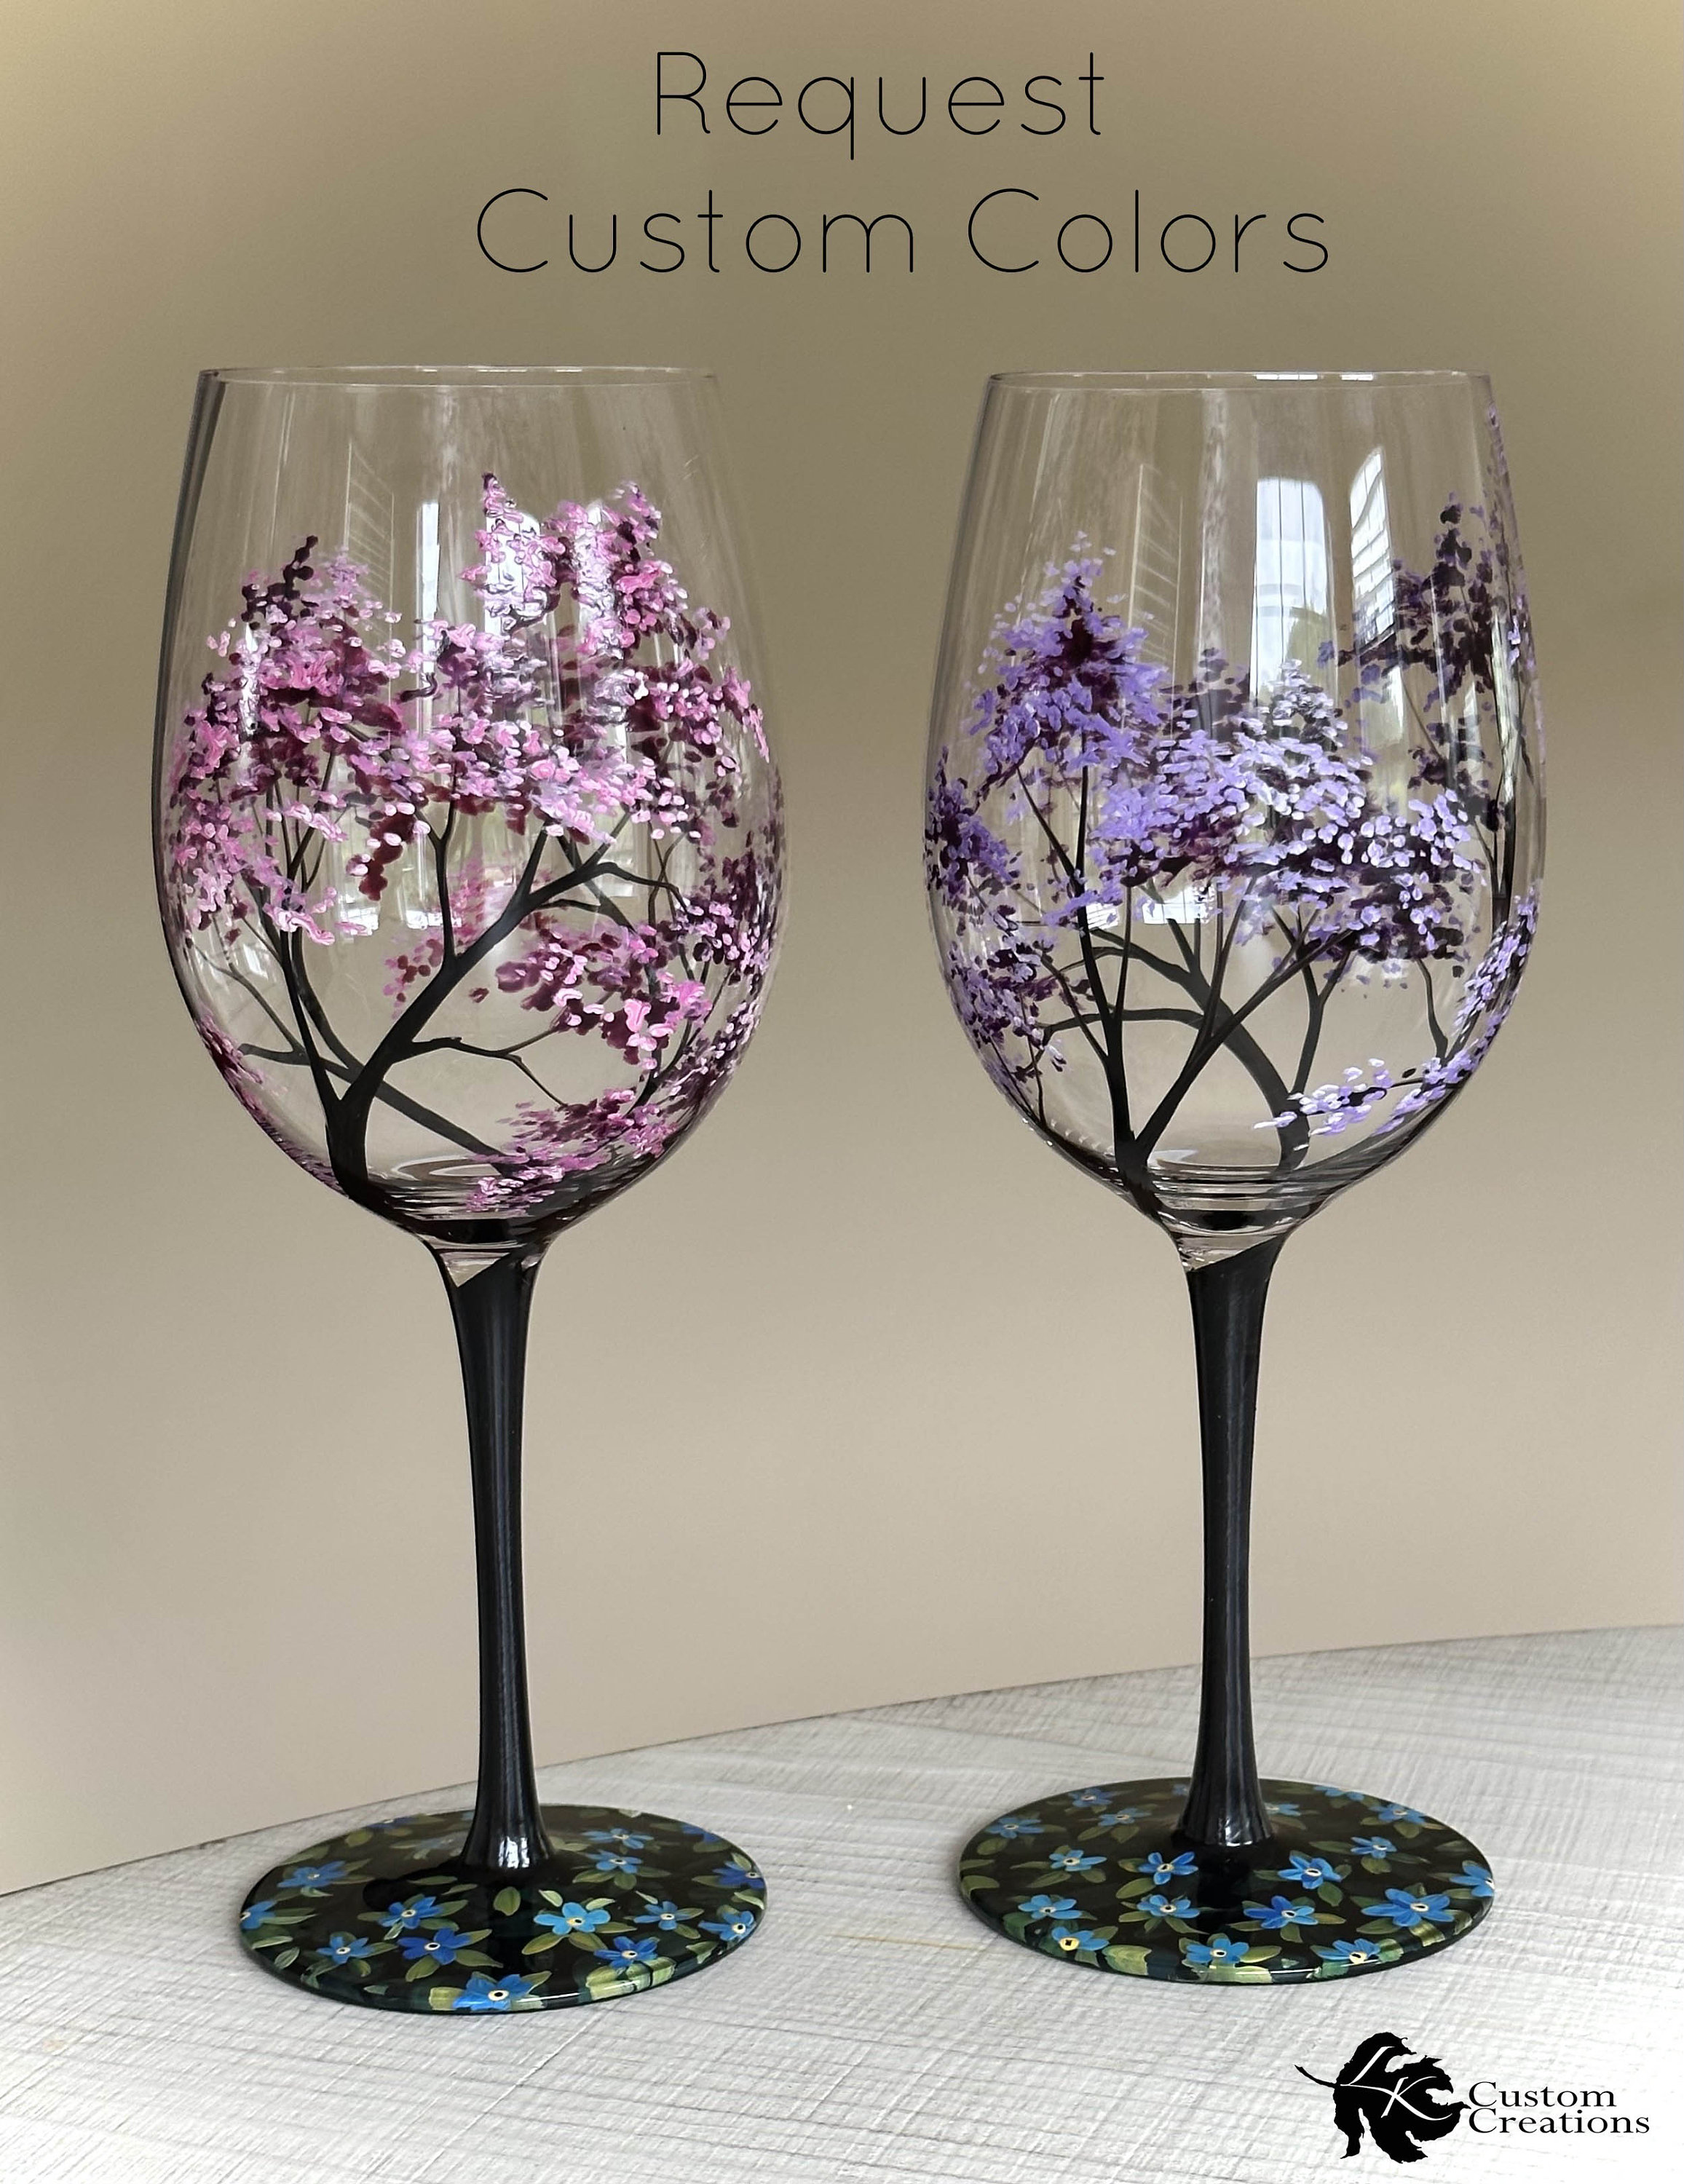 ART & ARTIFACT Four Seasons Tree Wine Glasses Set of 4 Unique Hand Painted  Wine Glasses with Stem, 10 Inch, 22 Ounce